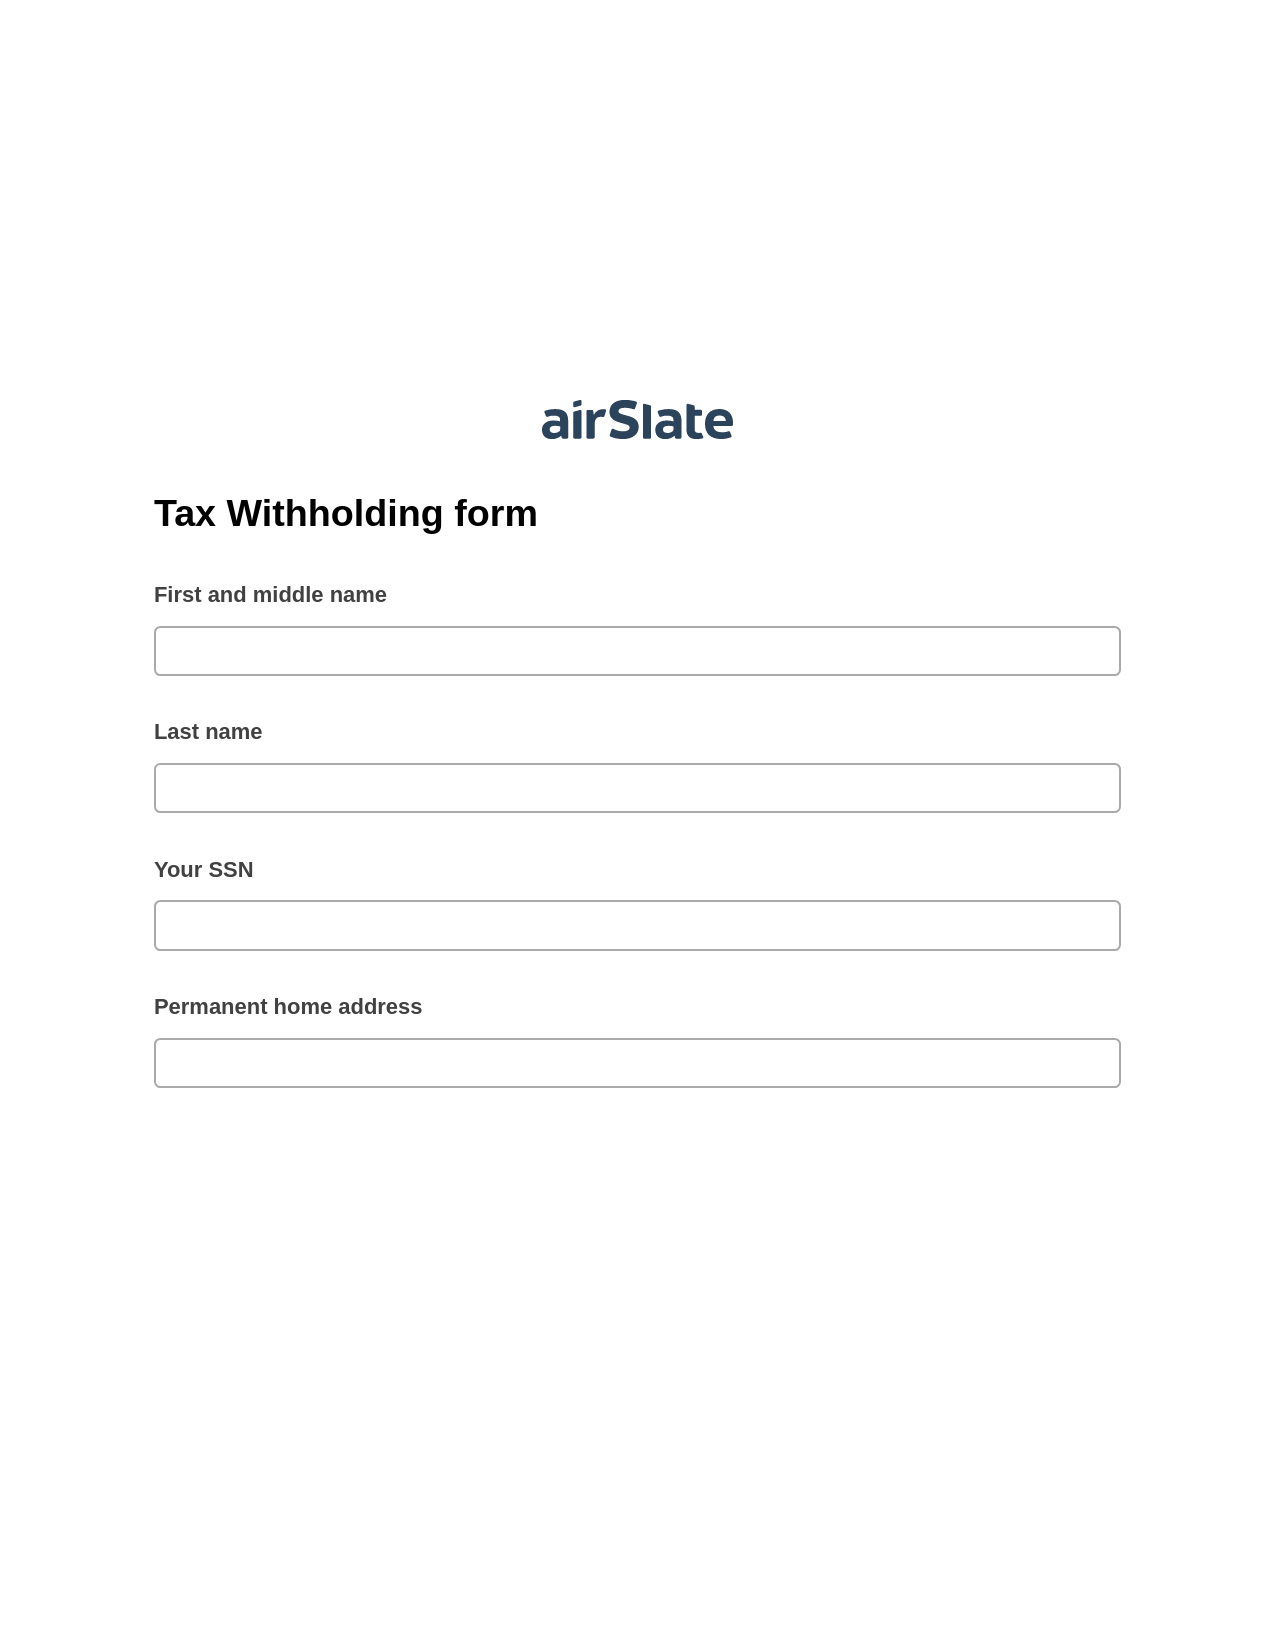 Multirole Tax Withholding form Pre-fill Slate from MS Dynamics 365 Records Bot, Roles Reminder Bot, Webhook Postfinish Bot